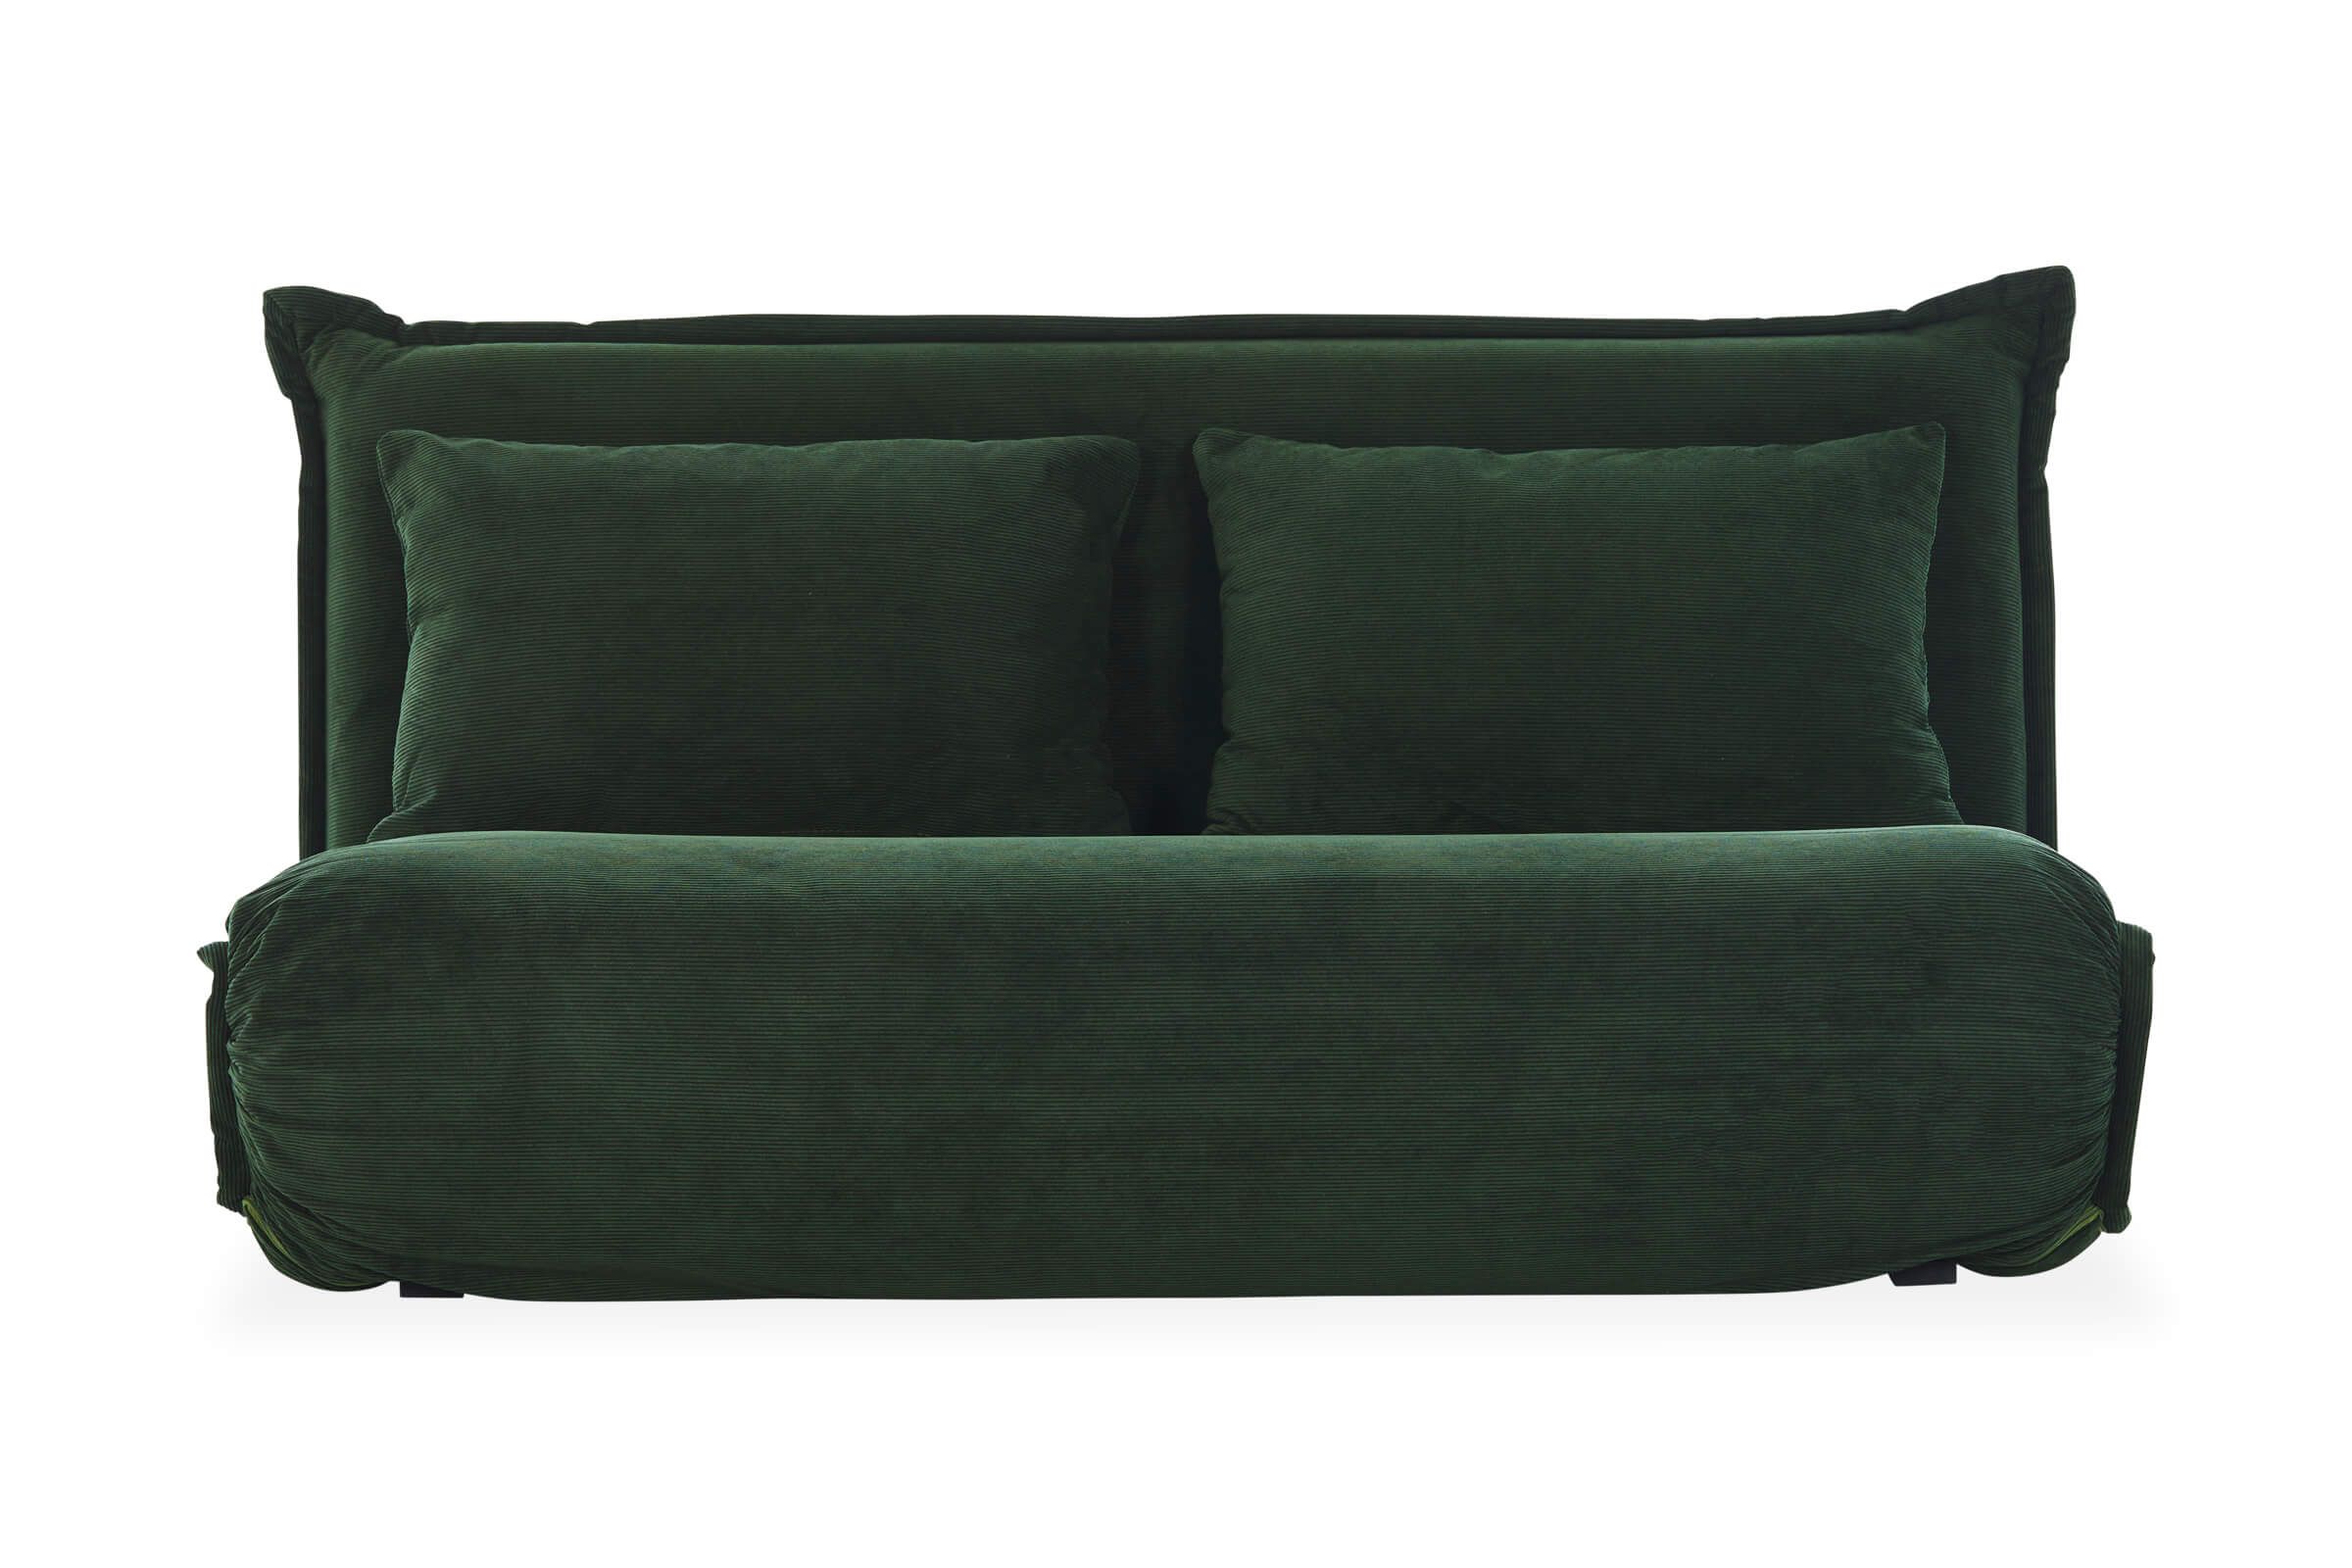 chaise lounge sofa bed modern:
  choose  leather for longer durability